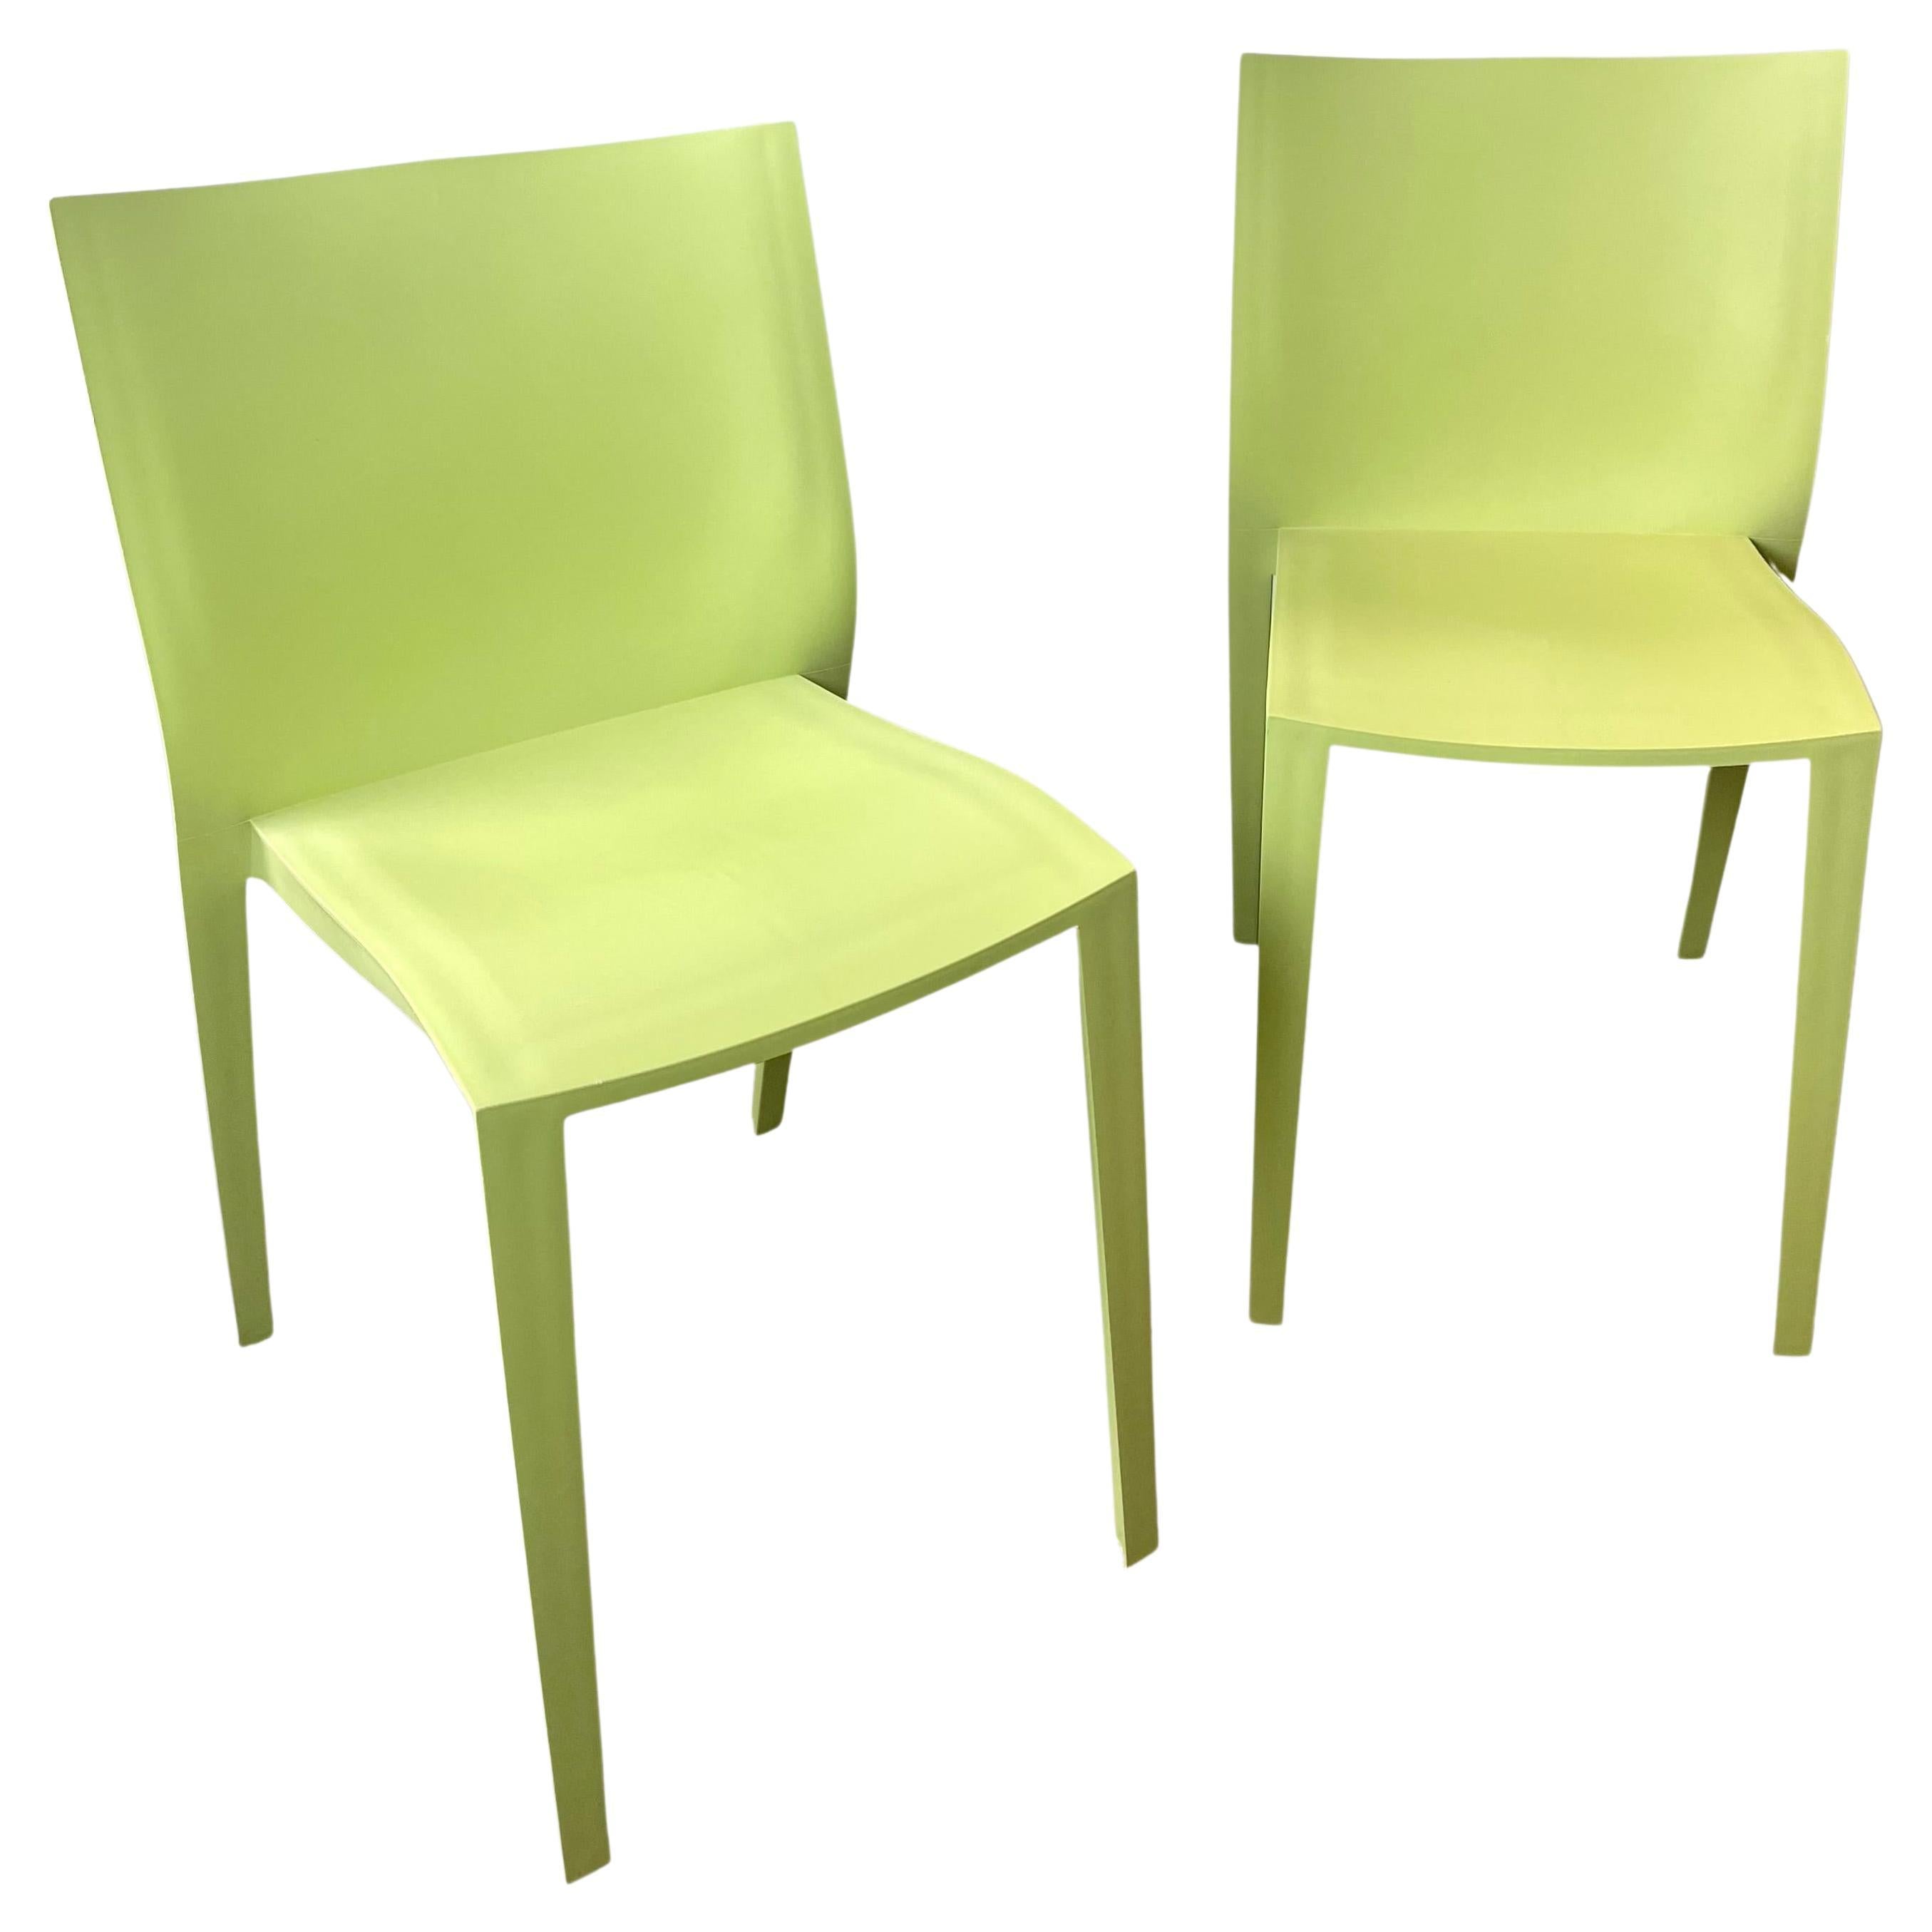 Philippe Starck, Set of 2 French Green Chairs, Design Slick Slick XO - France For Sale